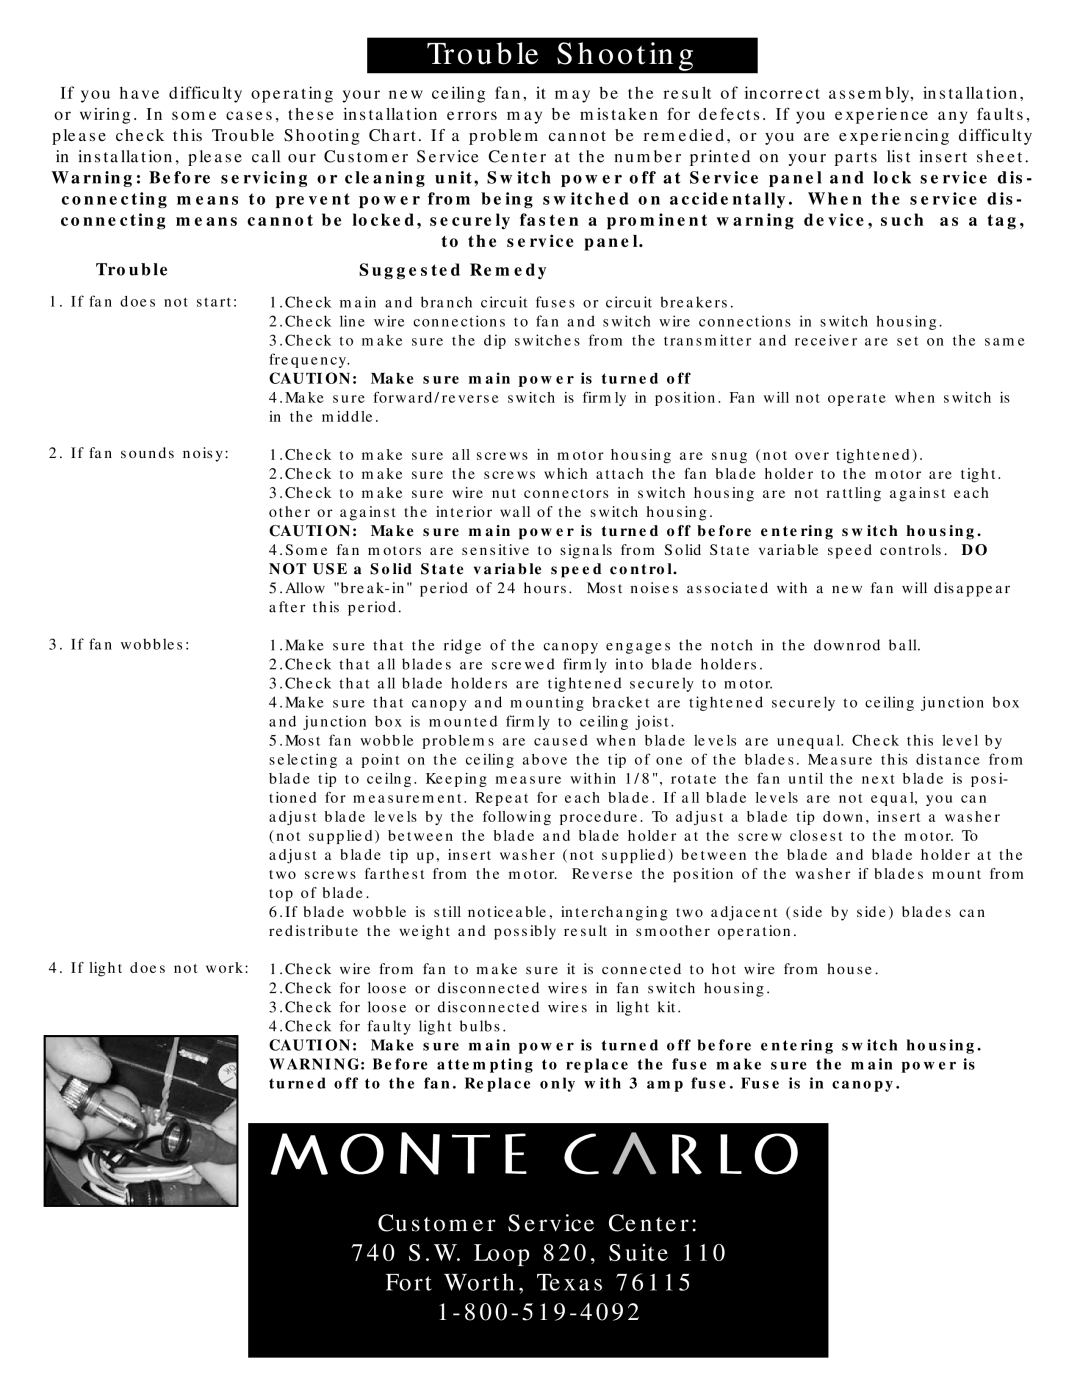 Monte Carlo Fan Company 5GIR54XXD owner manual Suggested Remedy, Customer Service Center 740 S.W. Loop 820, Suite 